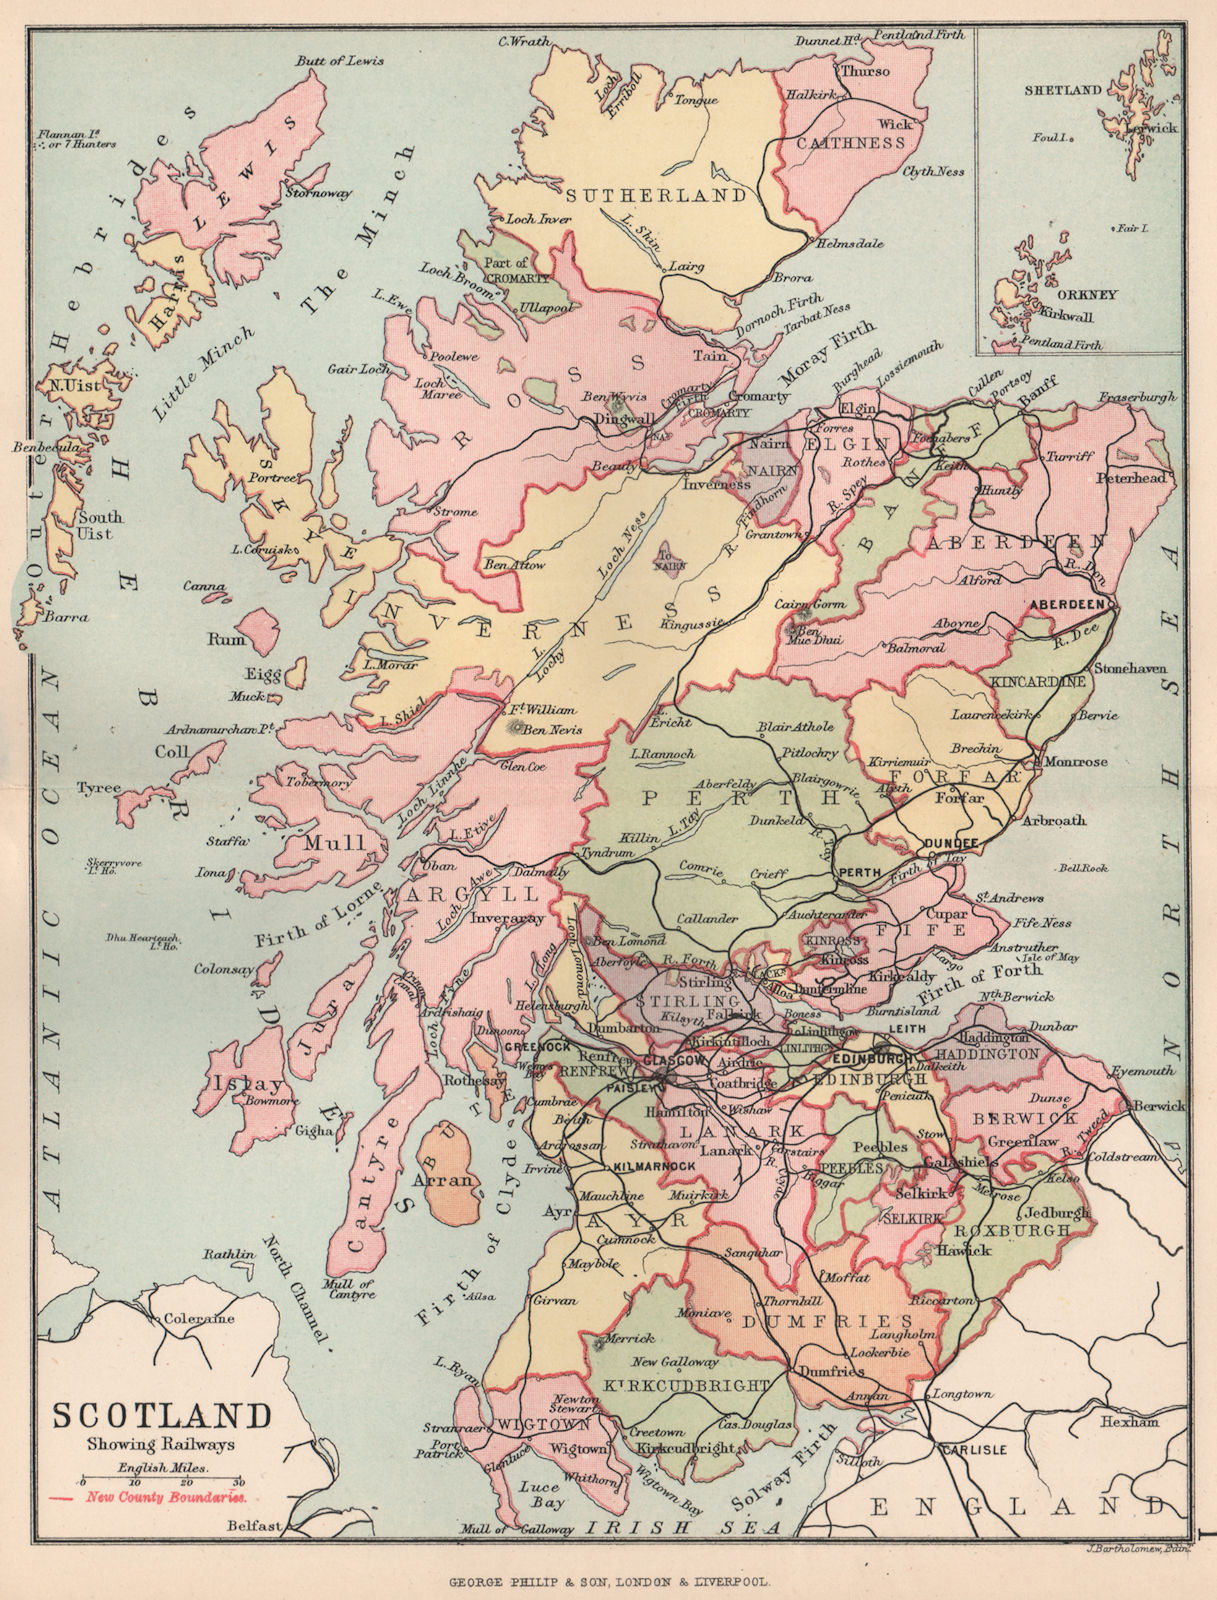 Associate Product 'Scotland showing Railways' & counties. BARTHOLOMEW 1891 old antique map chart